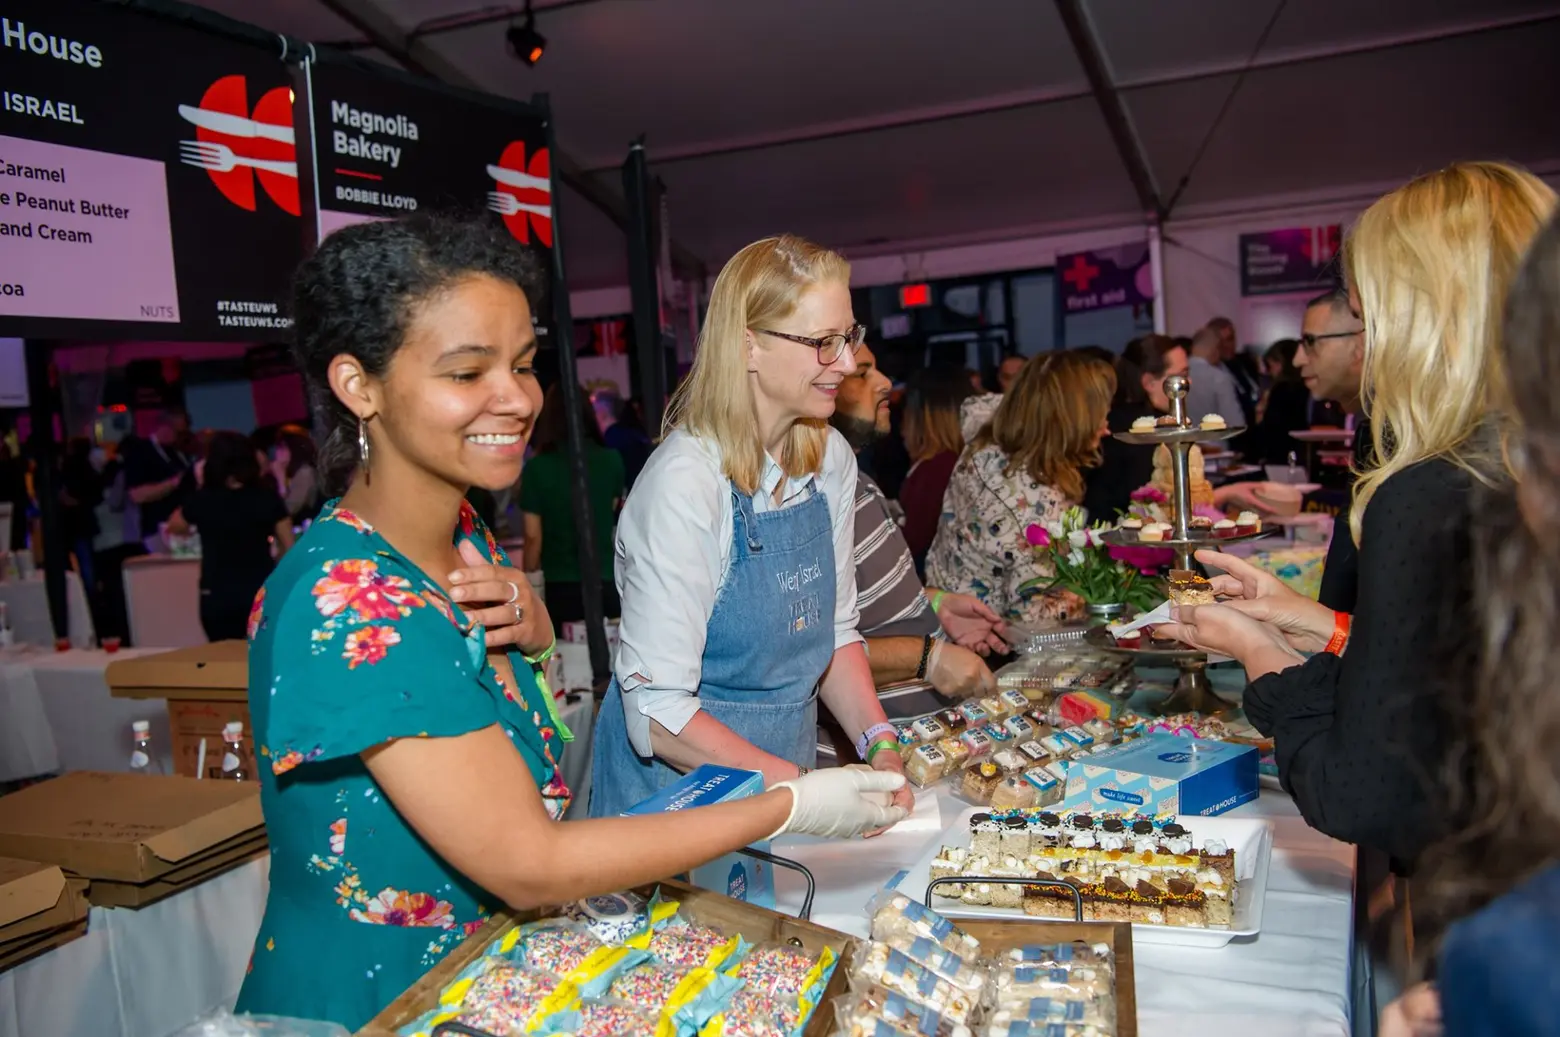 Fun food festivals are coming to the Upper West Side and South Street Seaport this month